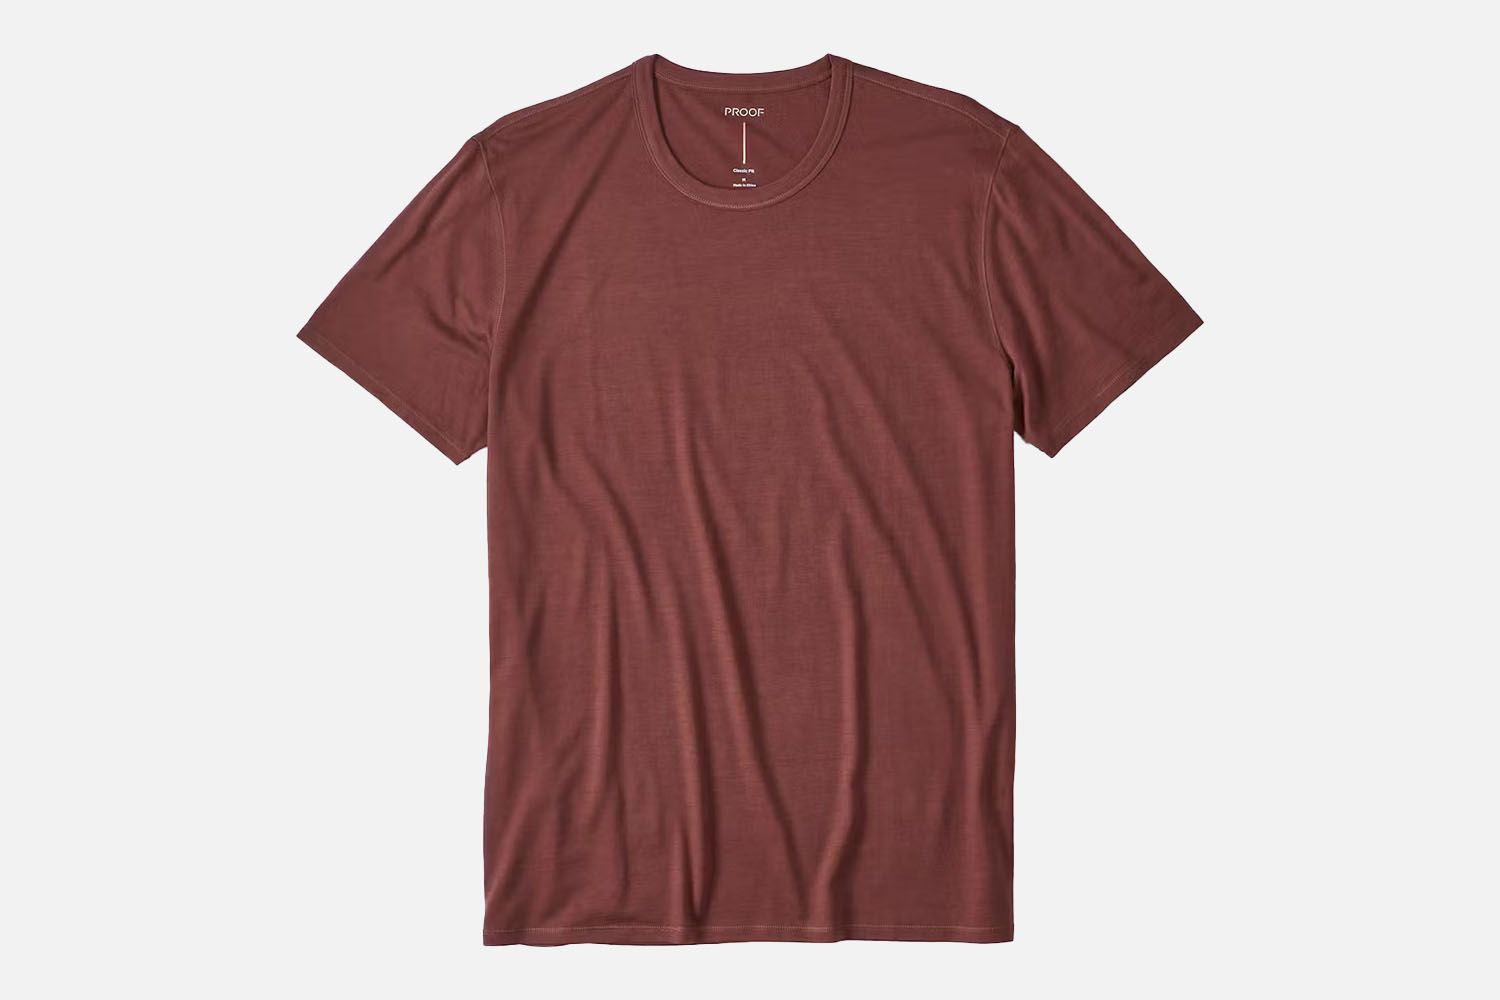 The Tee You Can Actually Wear for Three Days Straight: Proof 72-Hour Merino Classic Fit T-Shirt